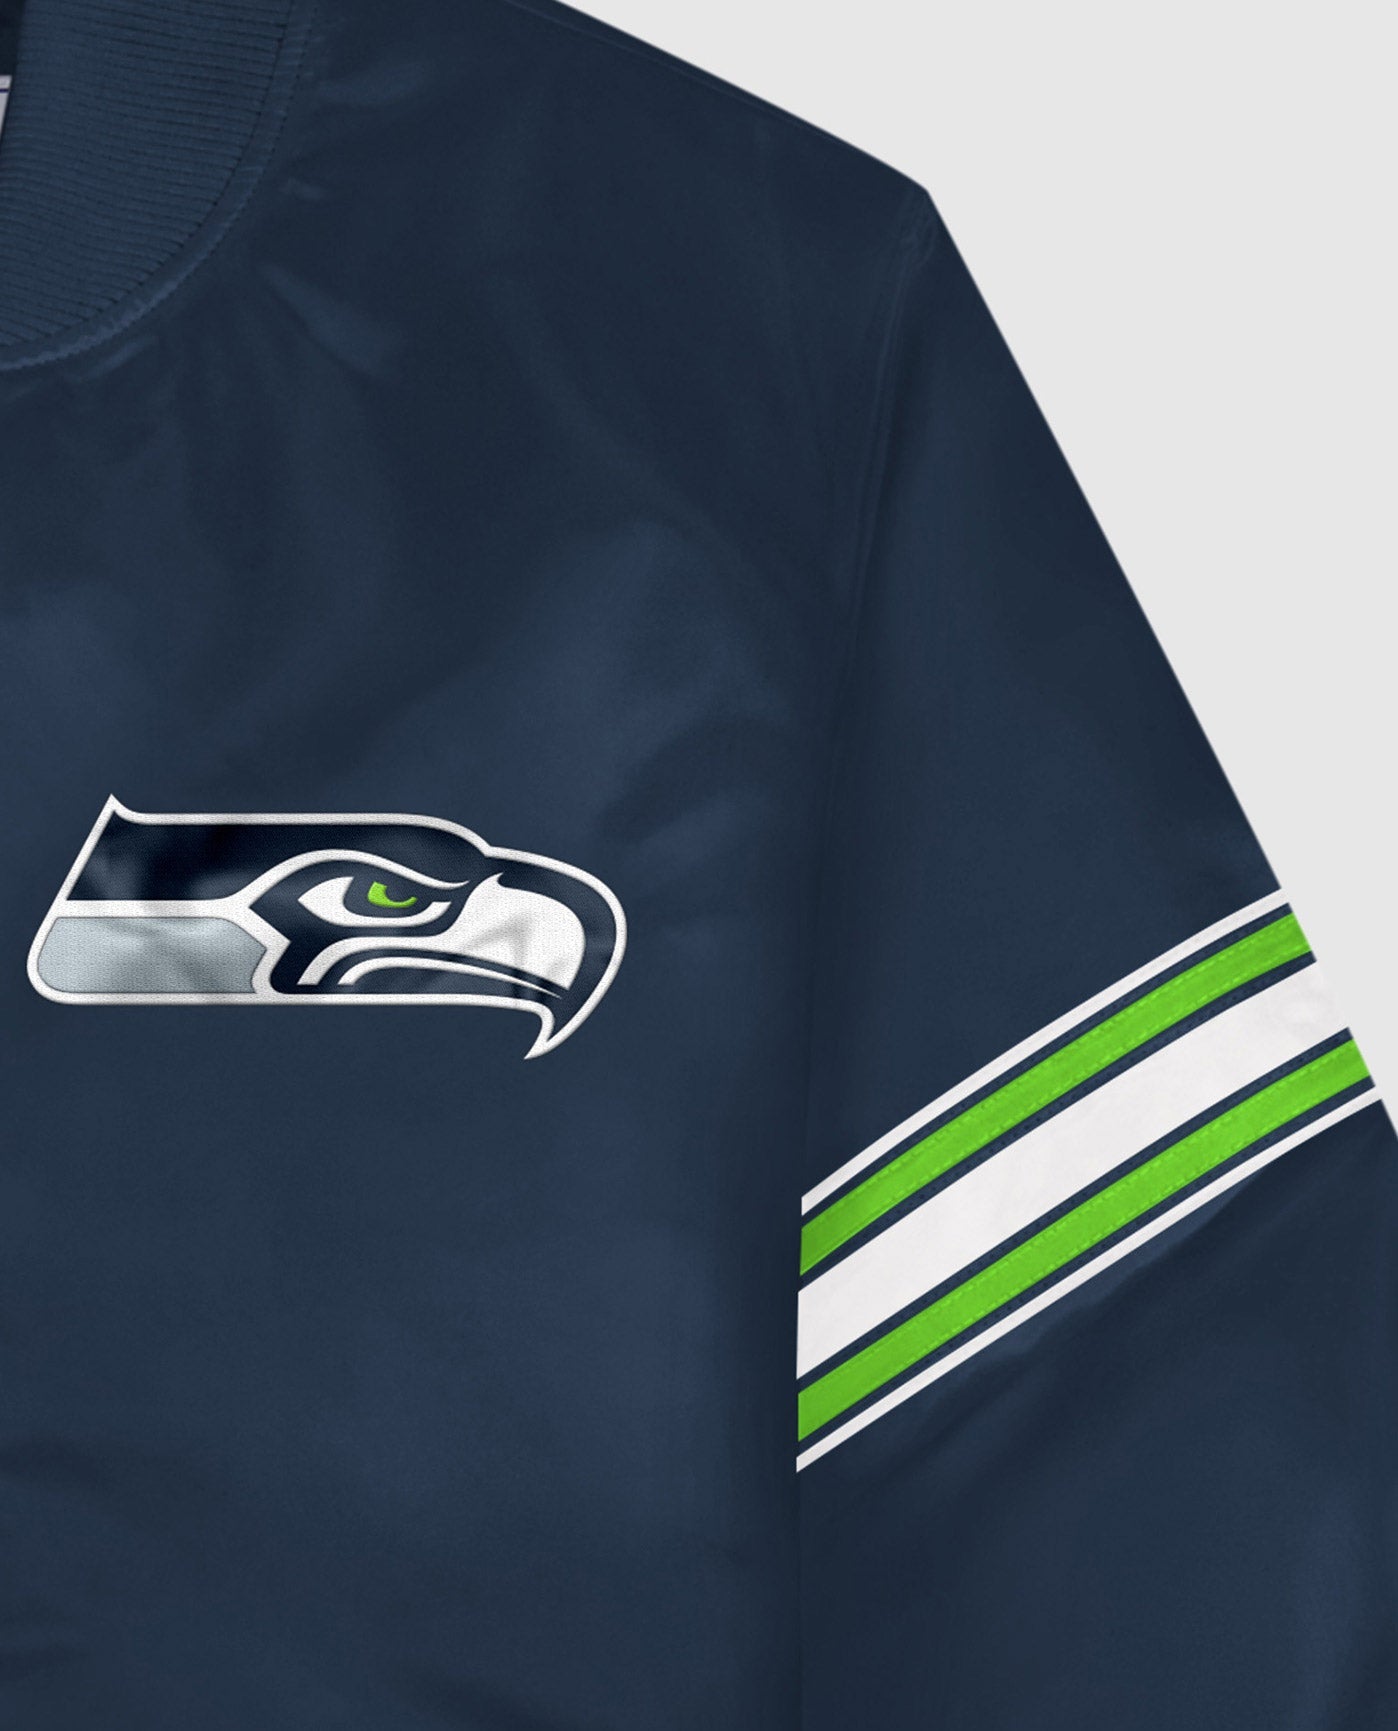 Seattle Seahawks Twill Applique Logo And Color Stripe Sleeve | Seahawks Navy